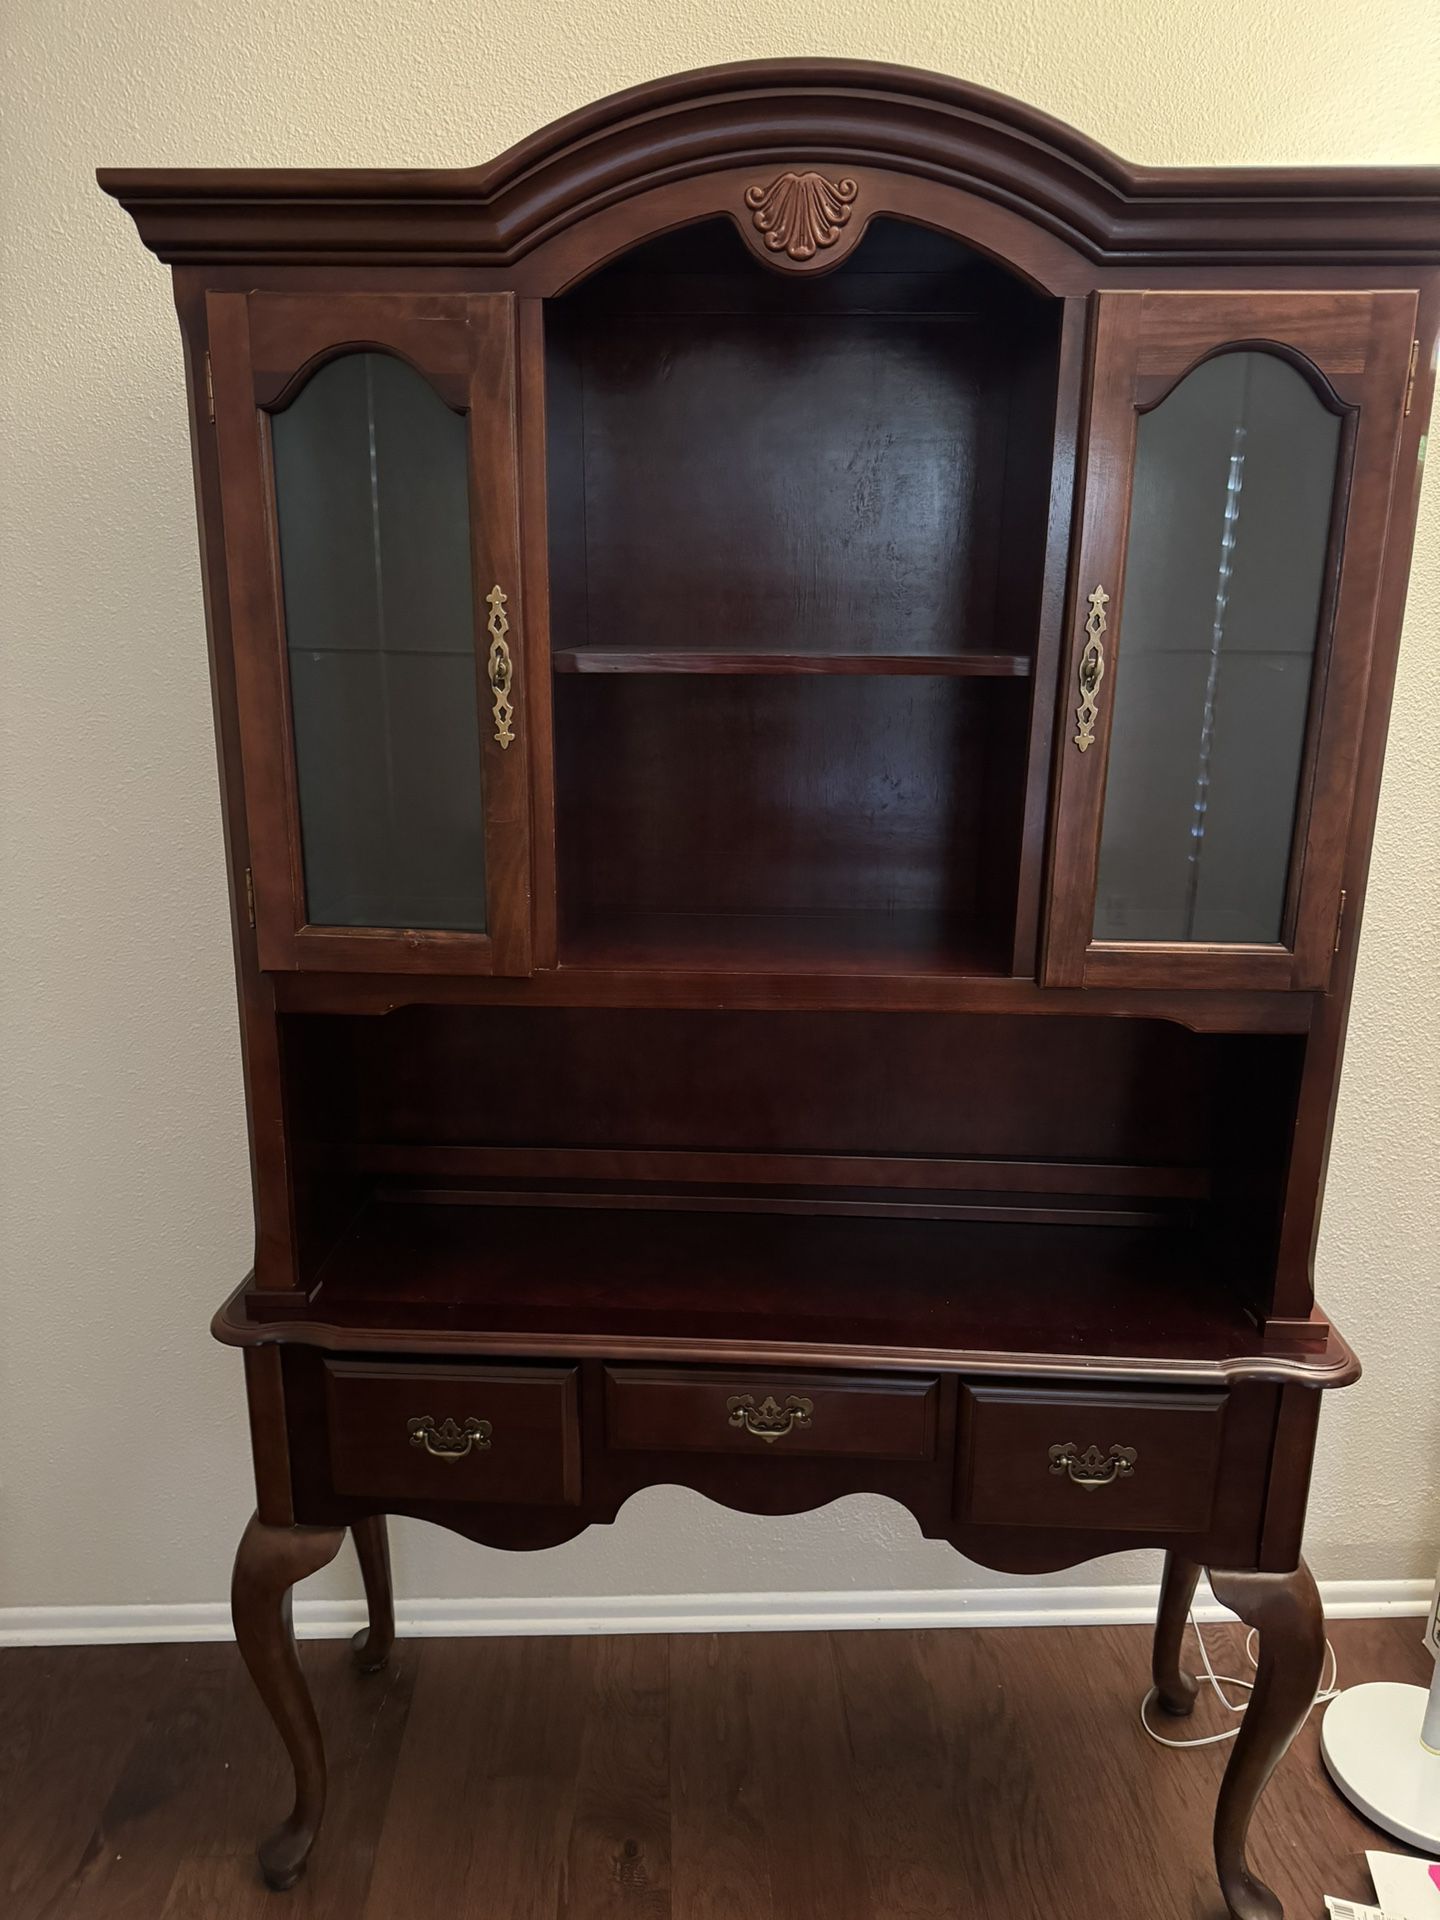 Queen Anne Style Hutch